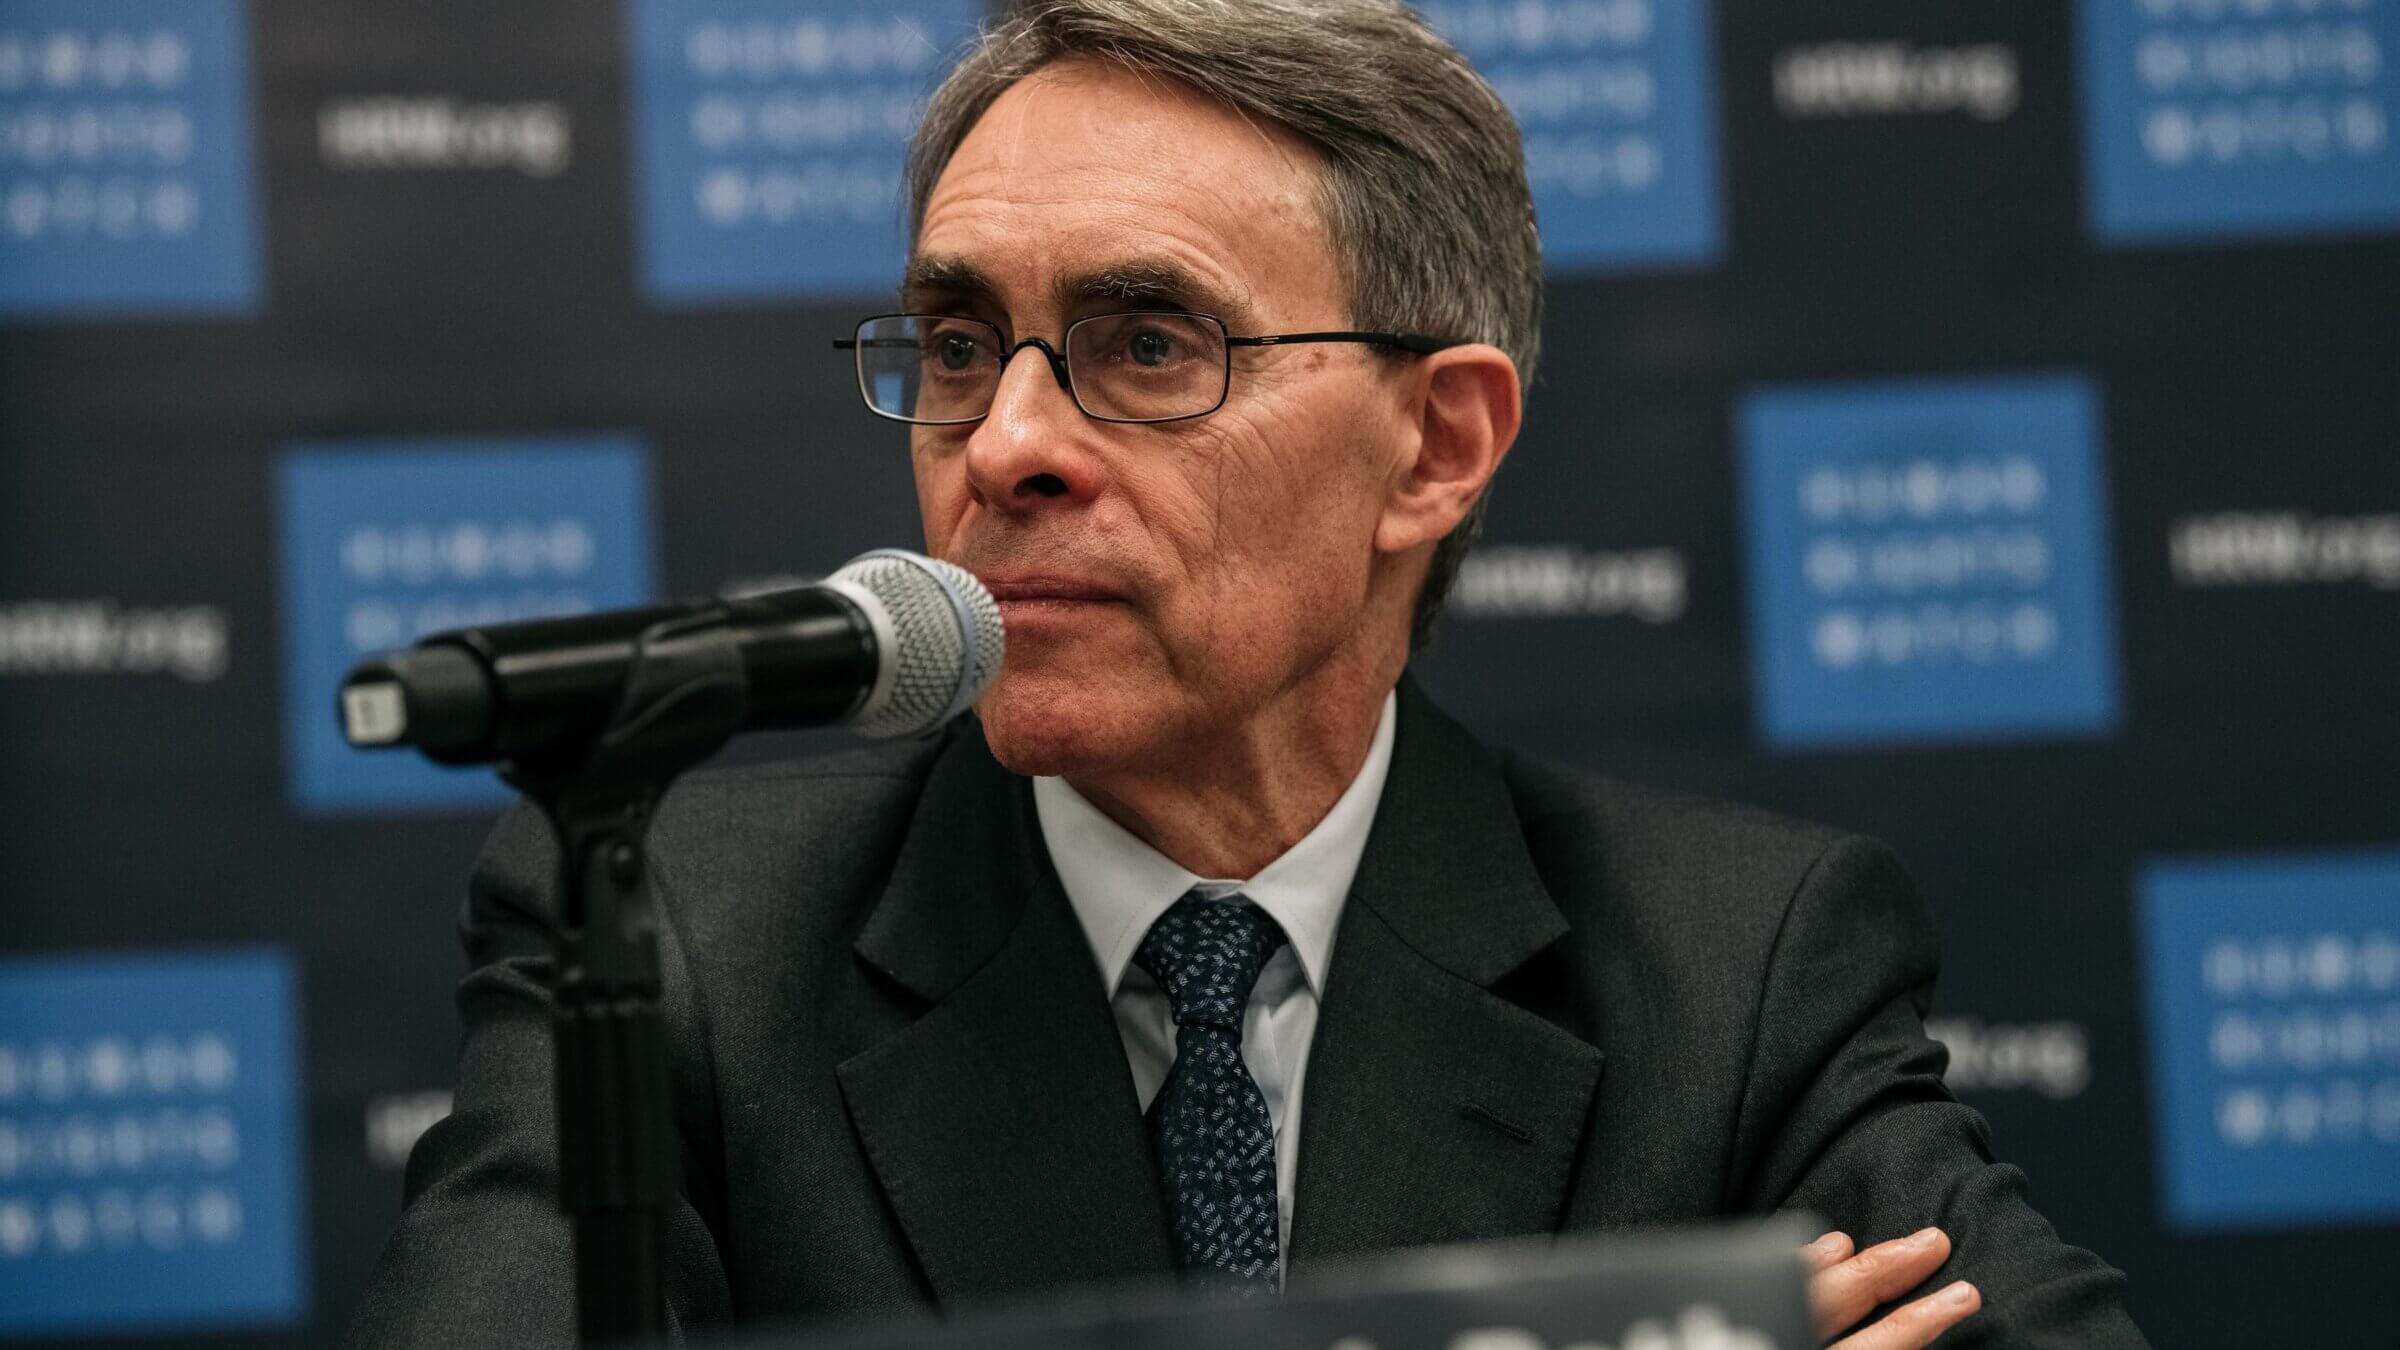 Kenneth Roth, the longtime Human Rights Watch director who stepped down last year, said that the dean of Harvard's Kennedy School vetoed his planned fellowship over the organization's work on Israel.